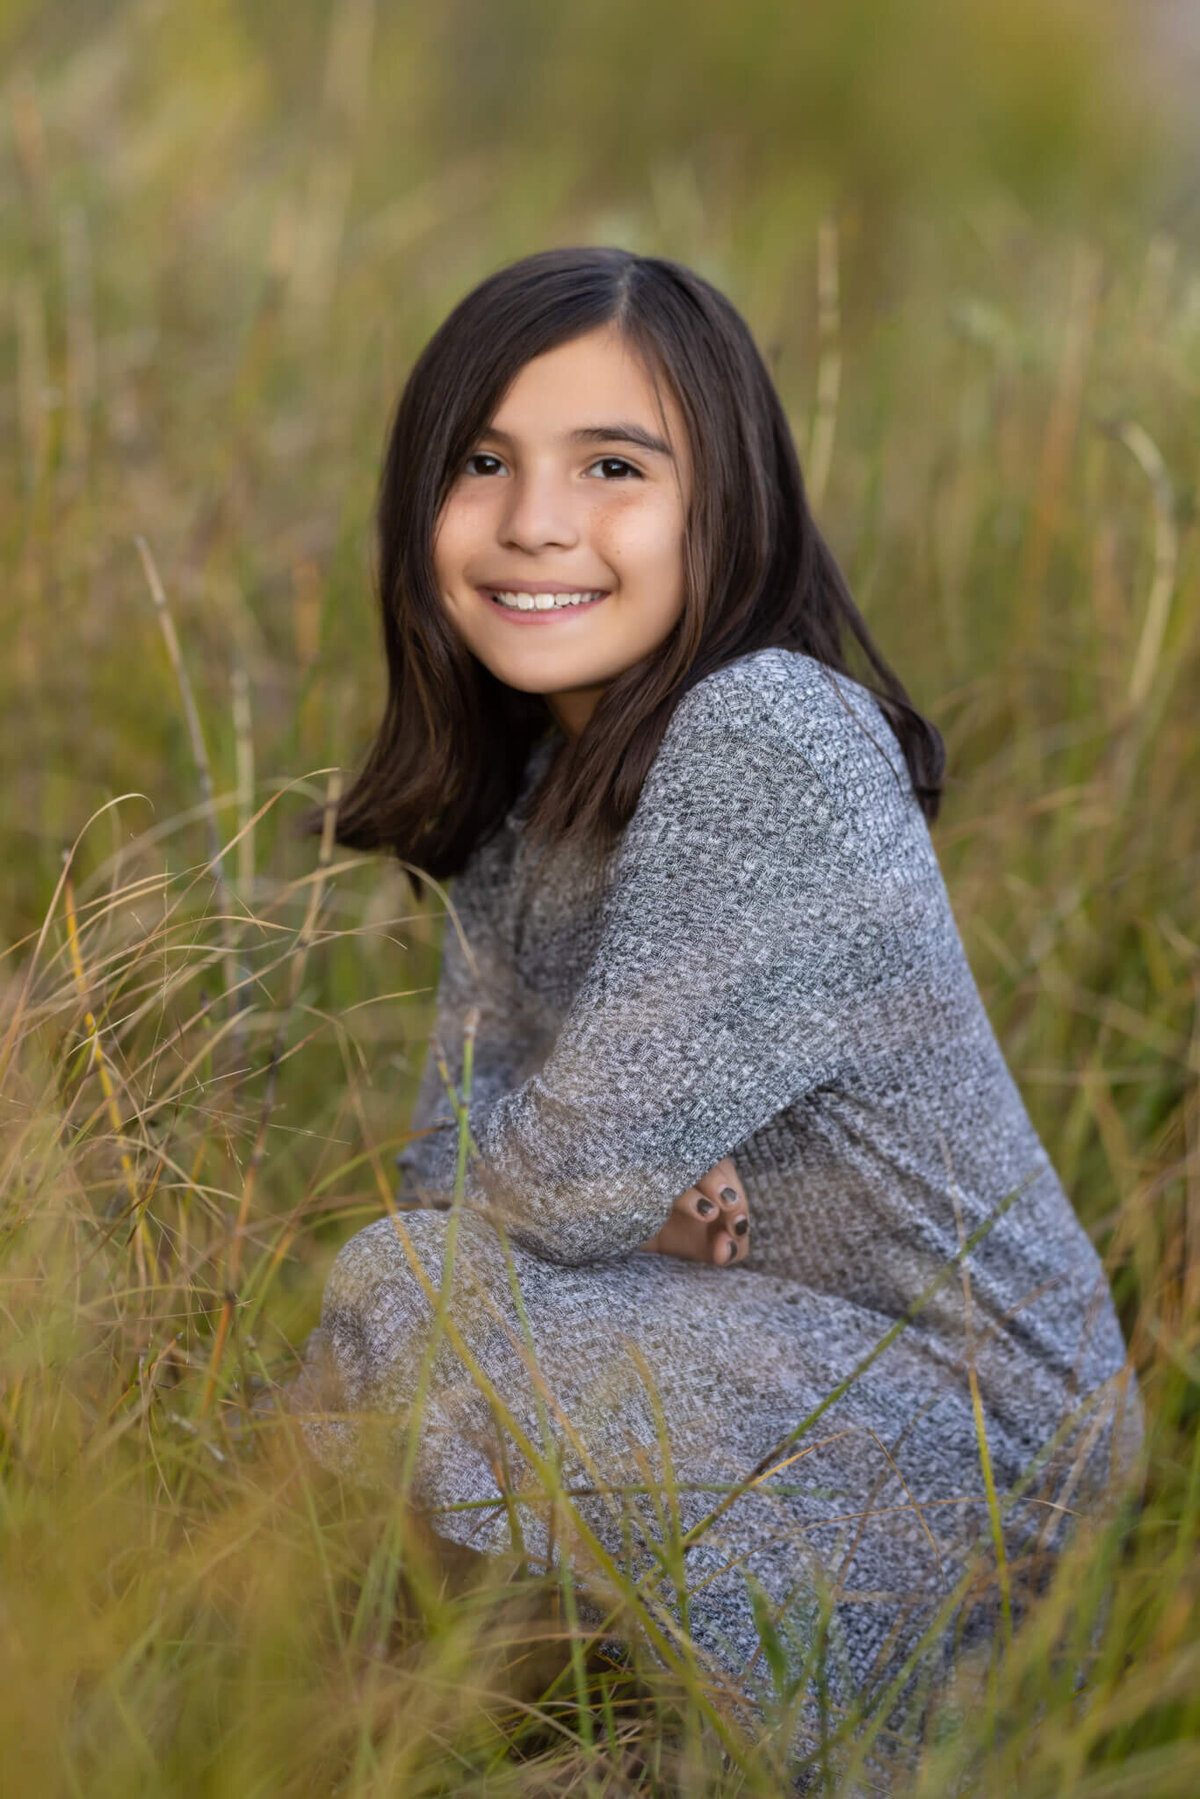 a young girl kneeling in tall grass